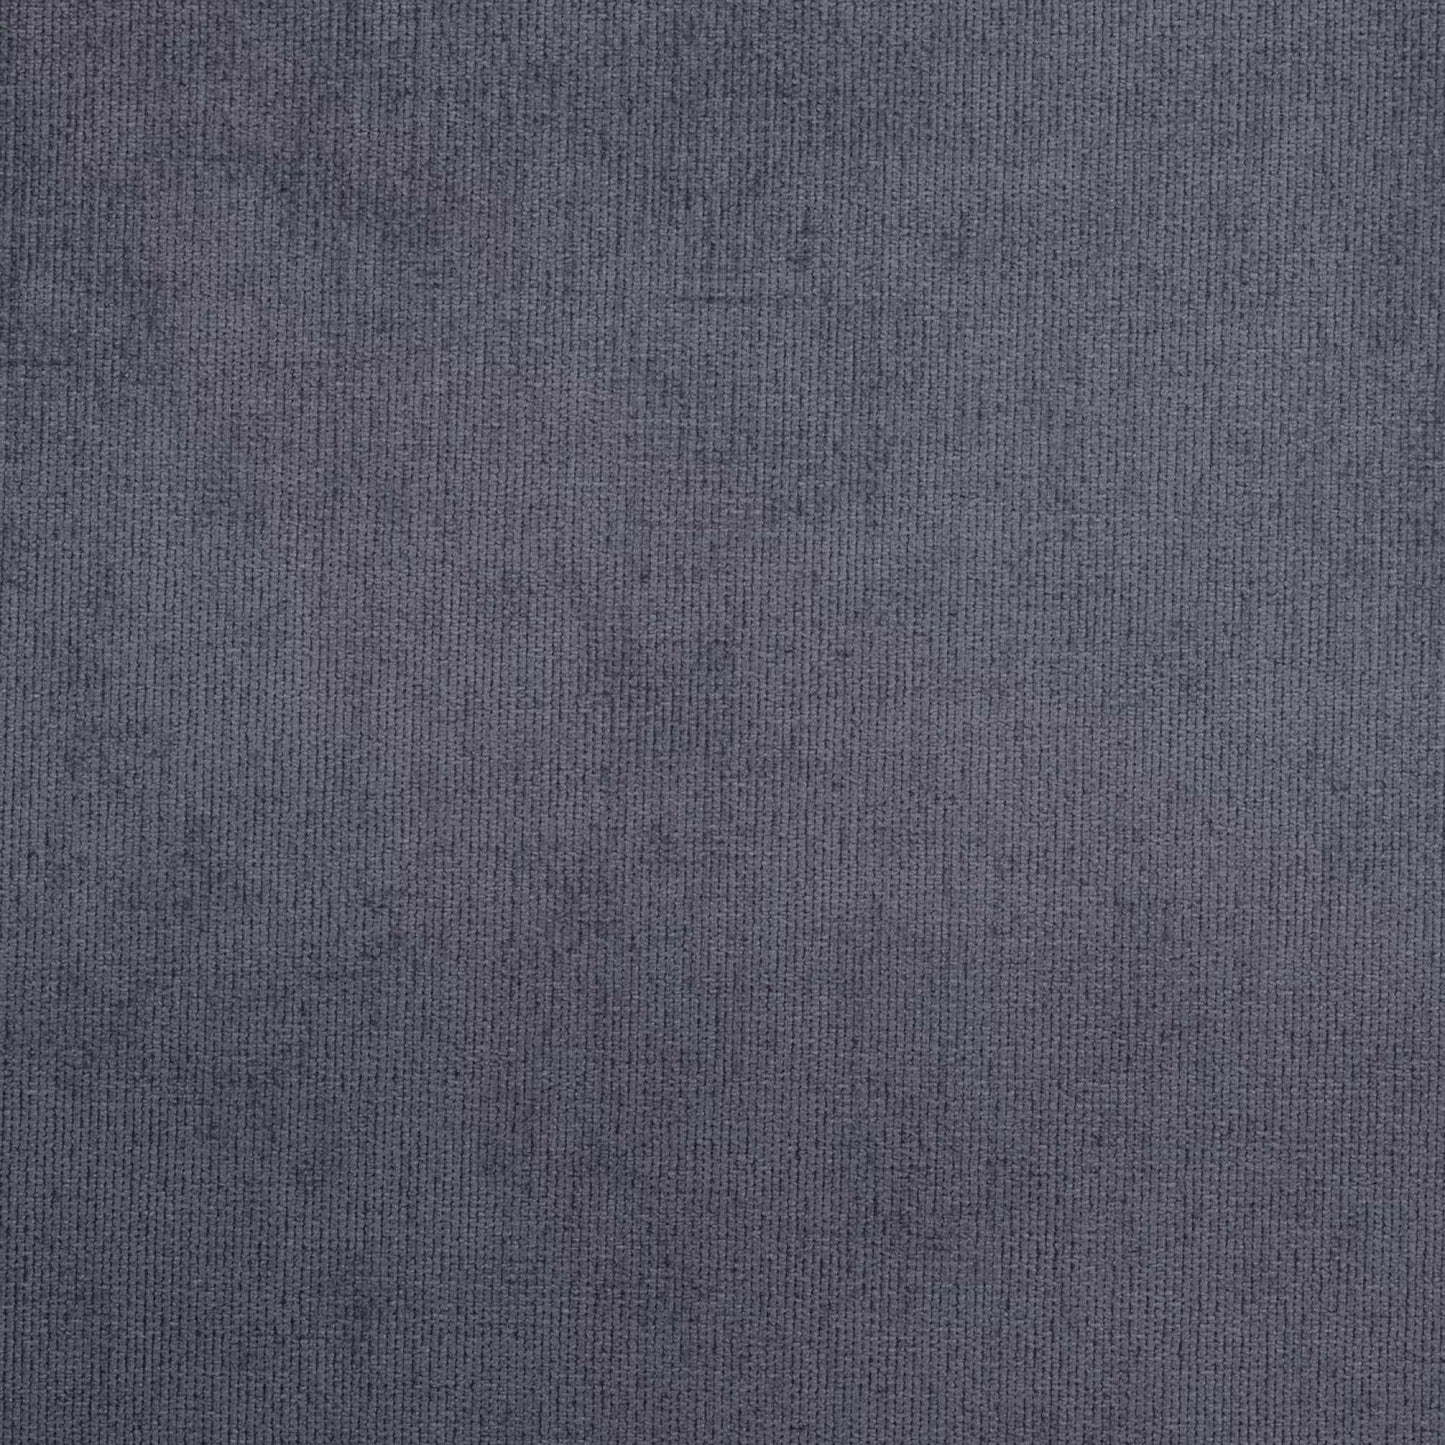 GALAXY SHADOW FABRIC SAMPLE | VALUE COLLECTION